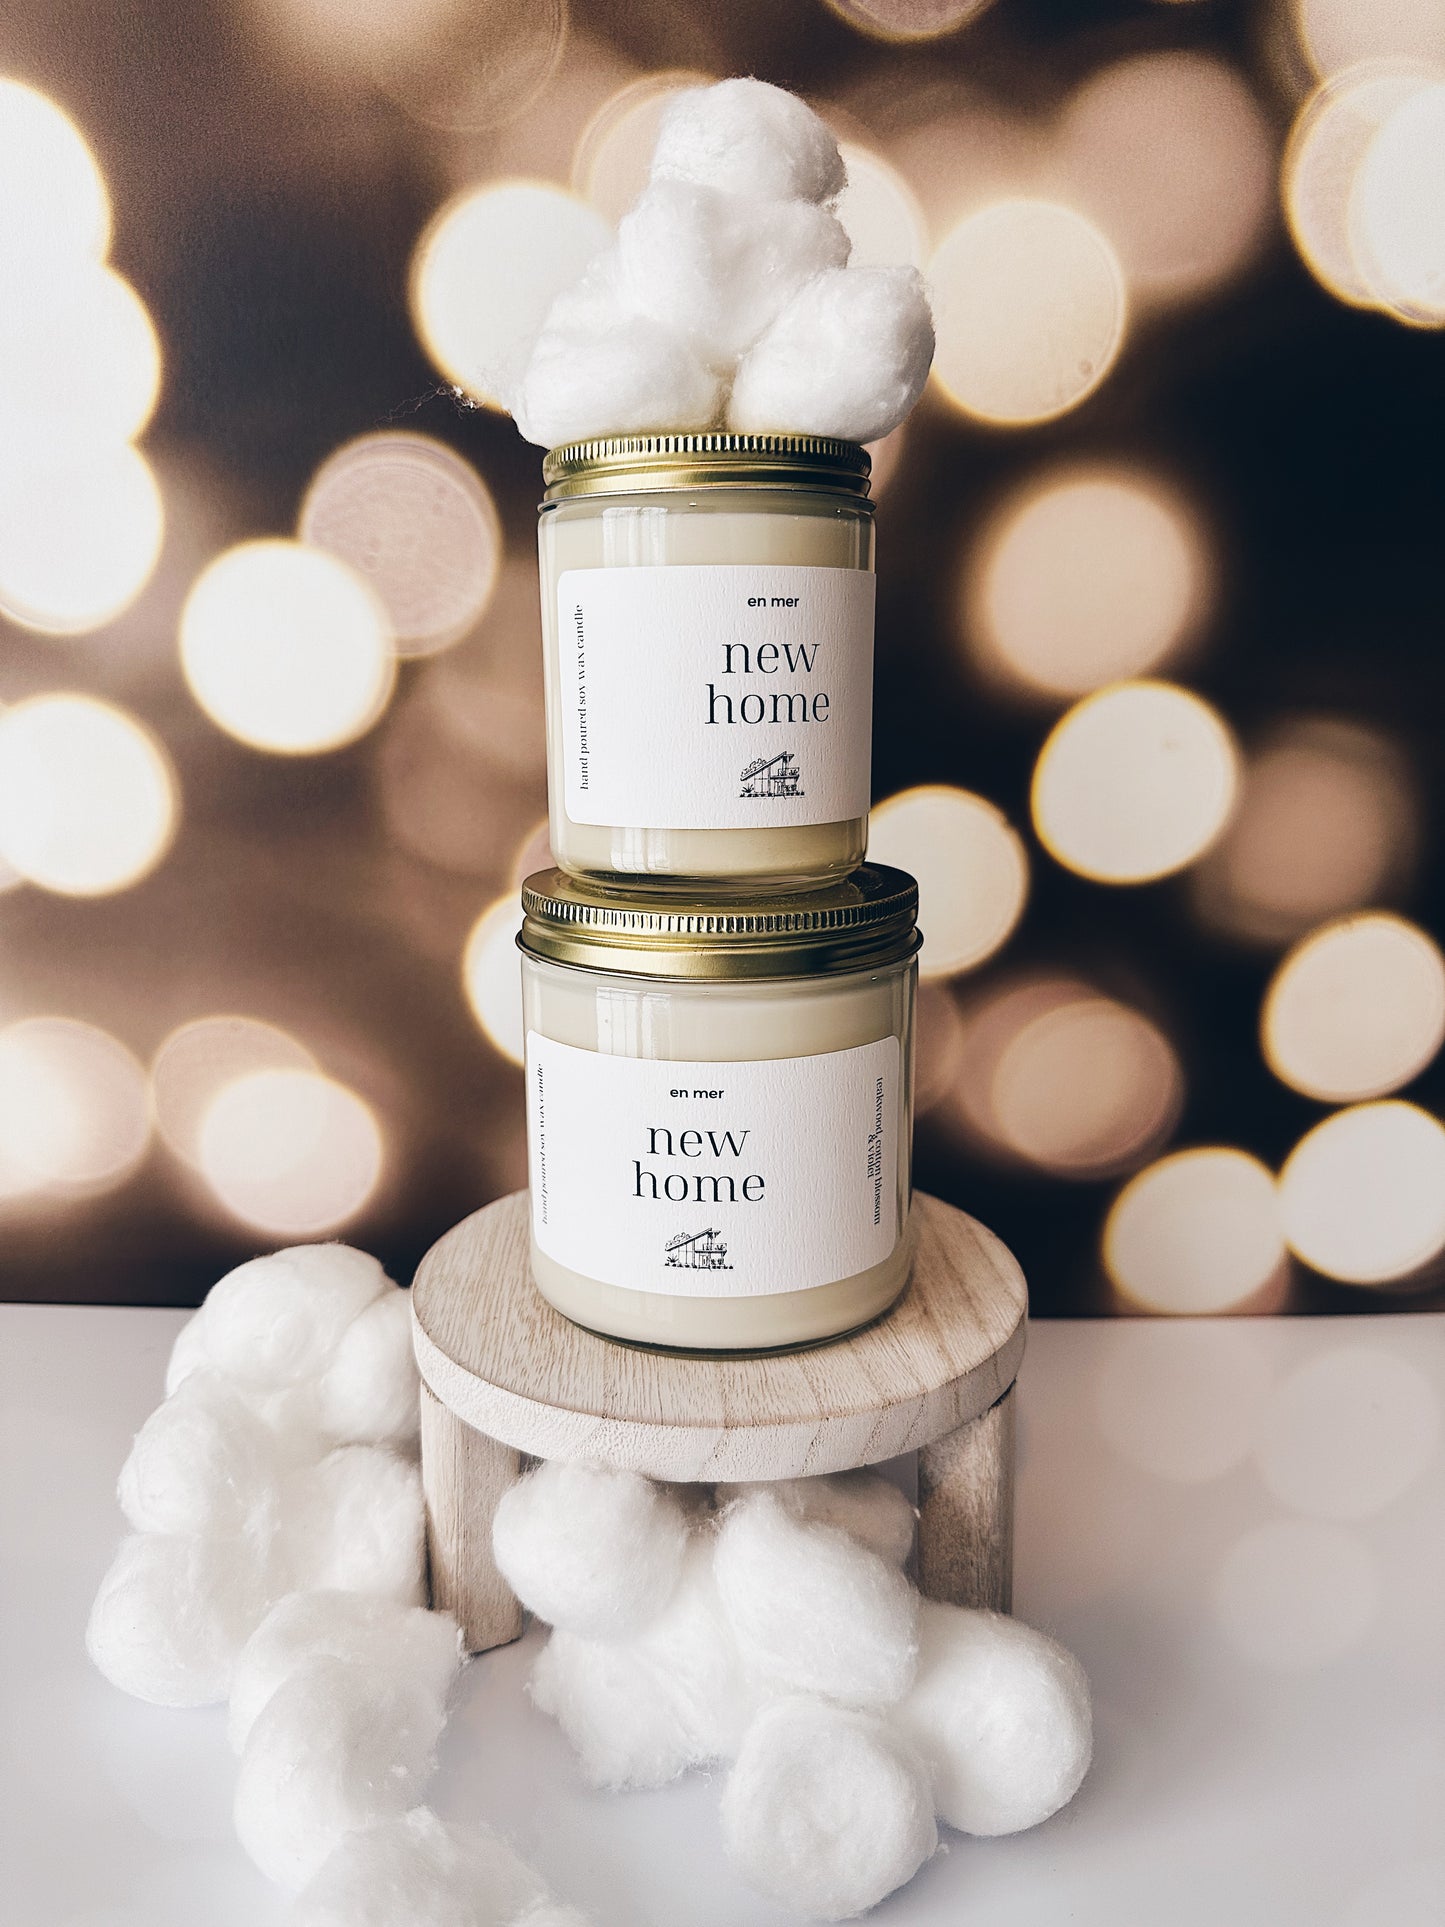 en mer | new home | soy wax candle